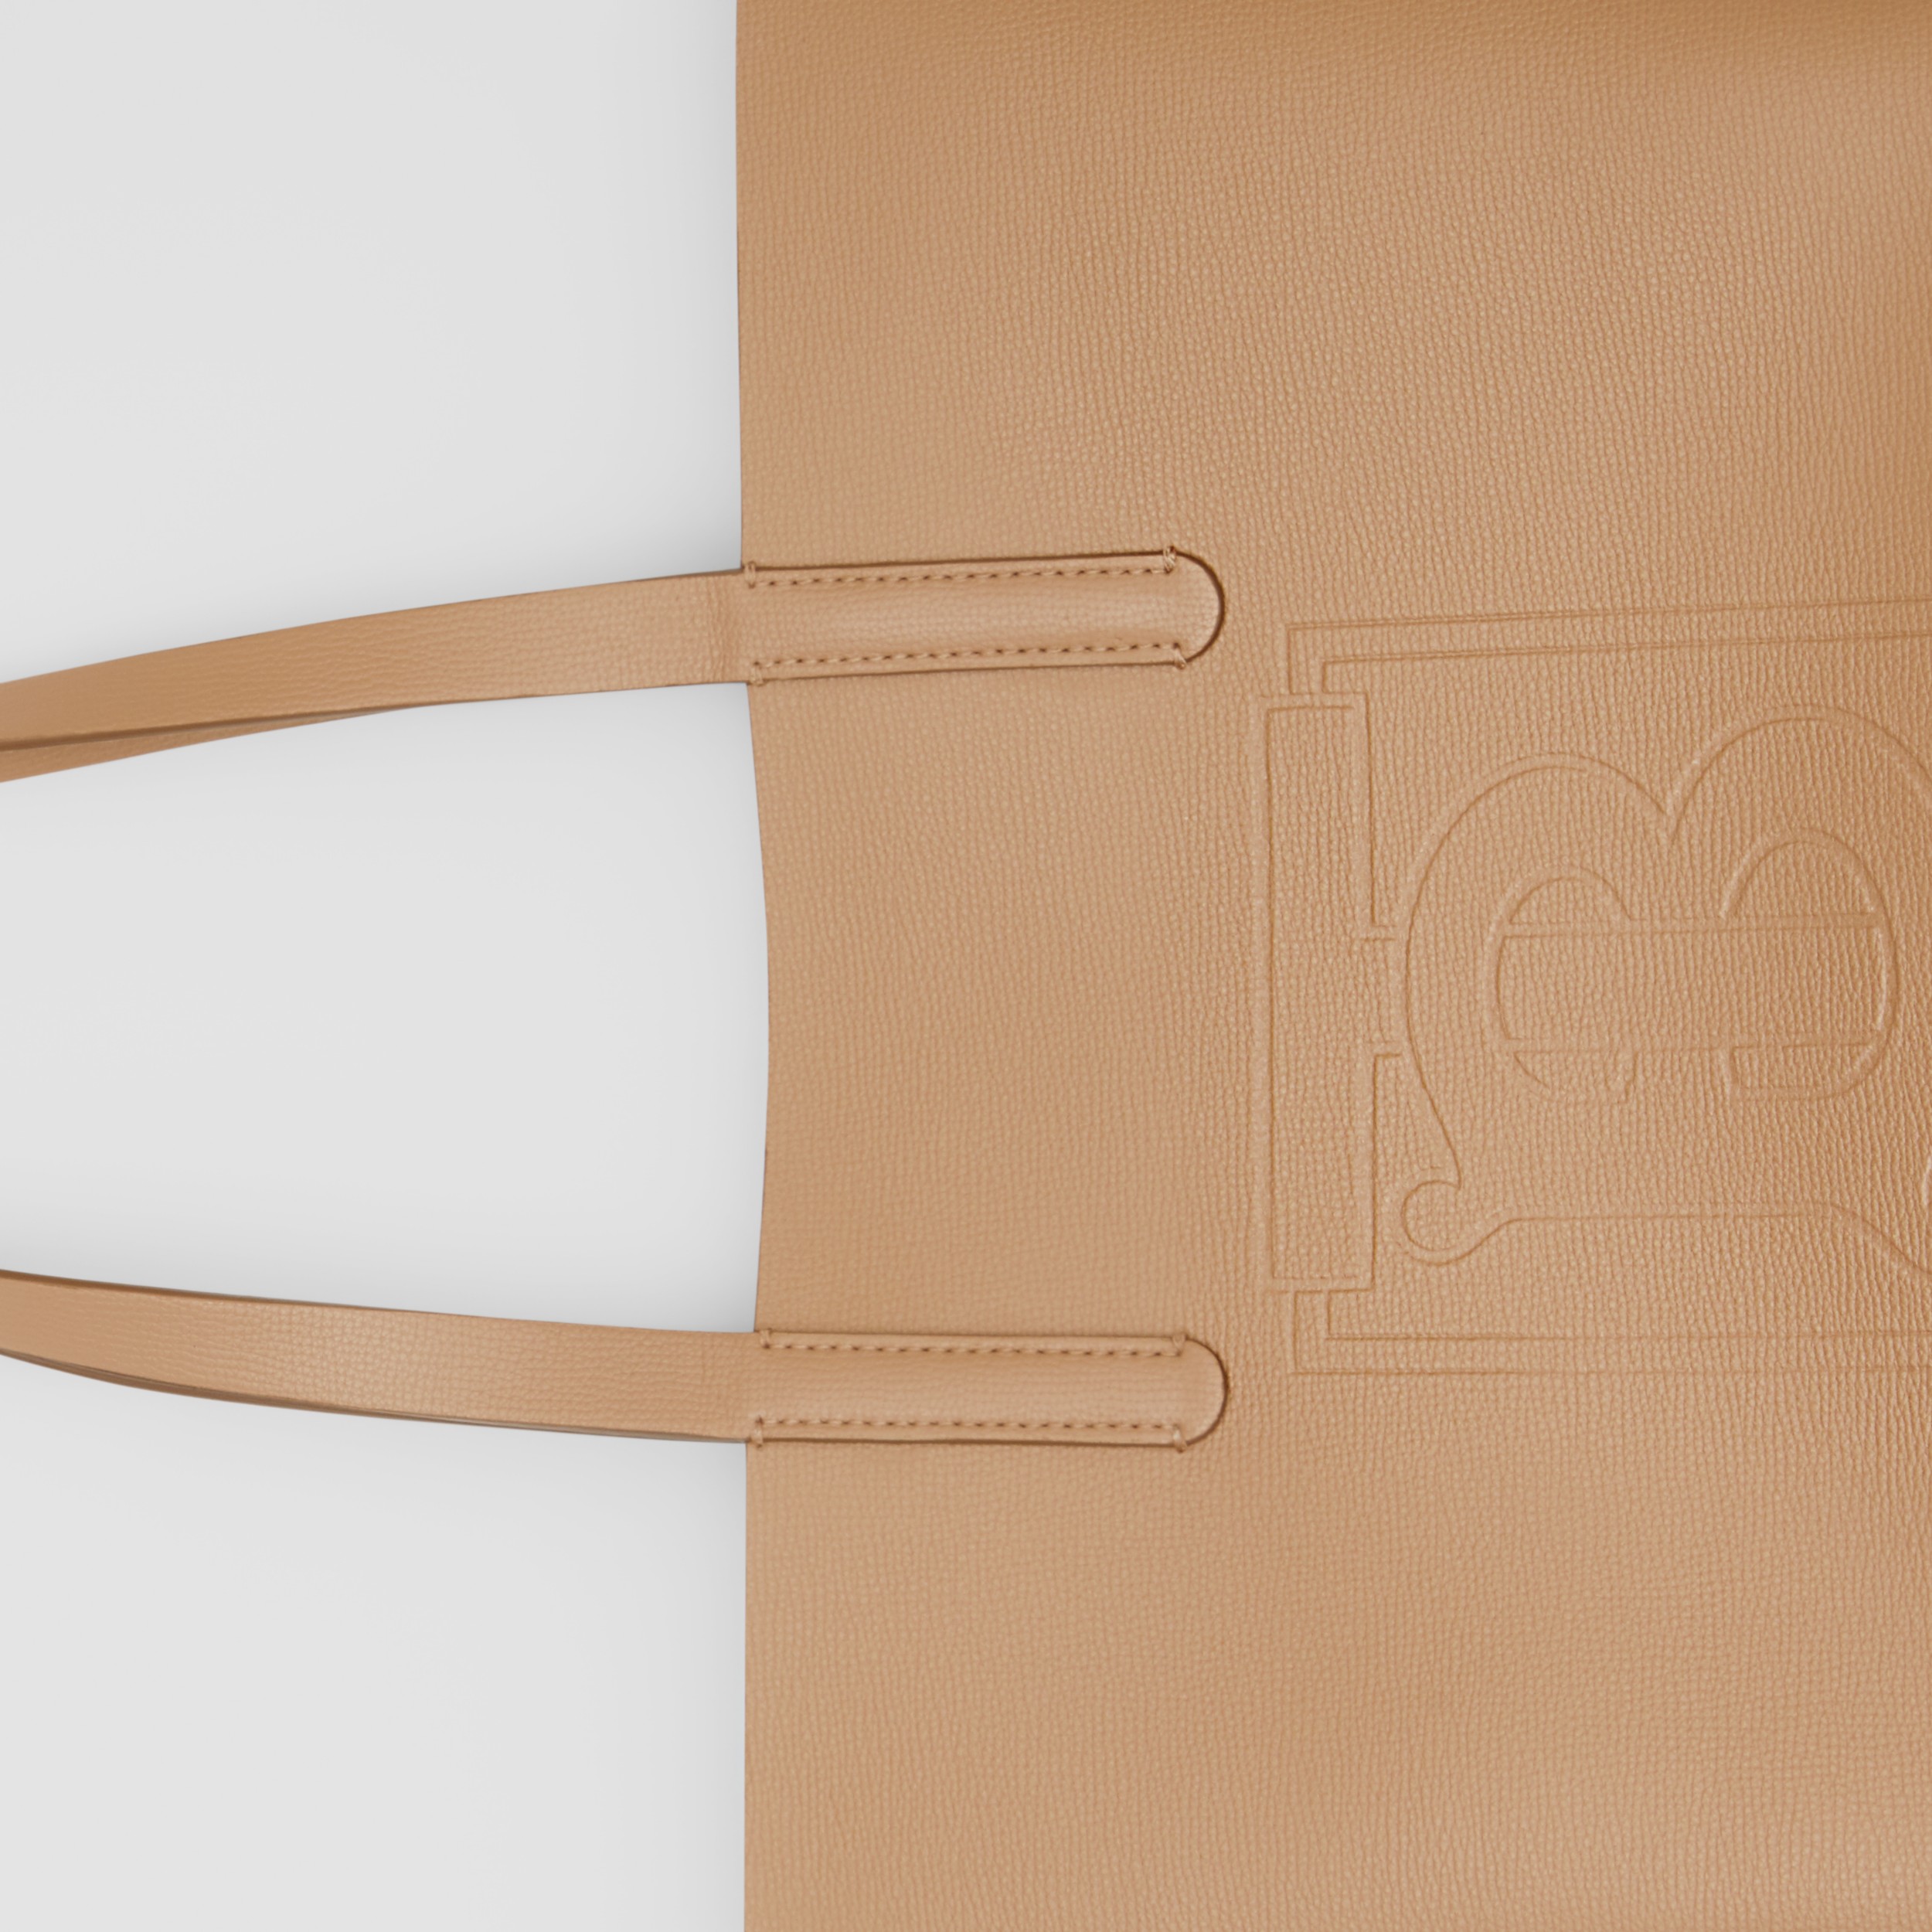 Embossed Monogram Motif Leather Tote in Camel - Women | Burberry United ...